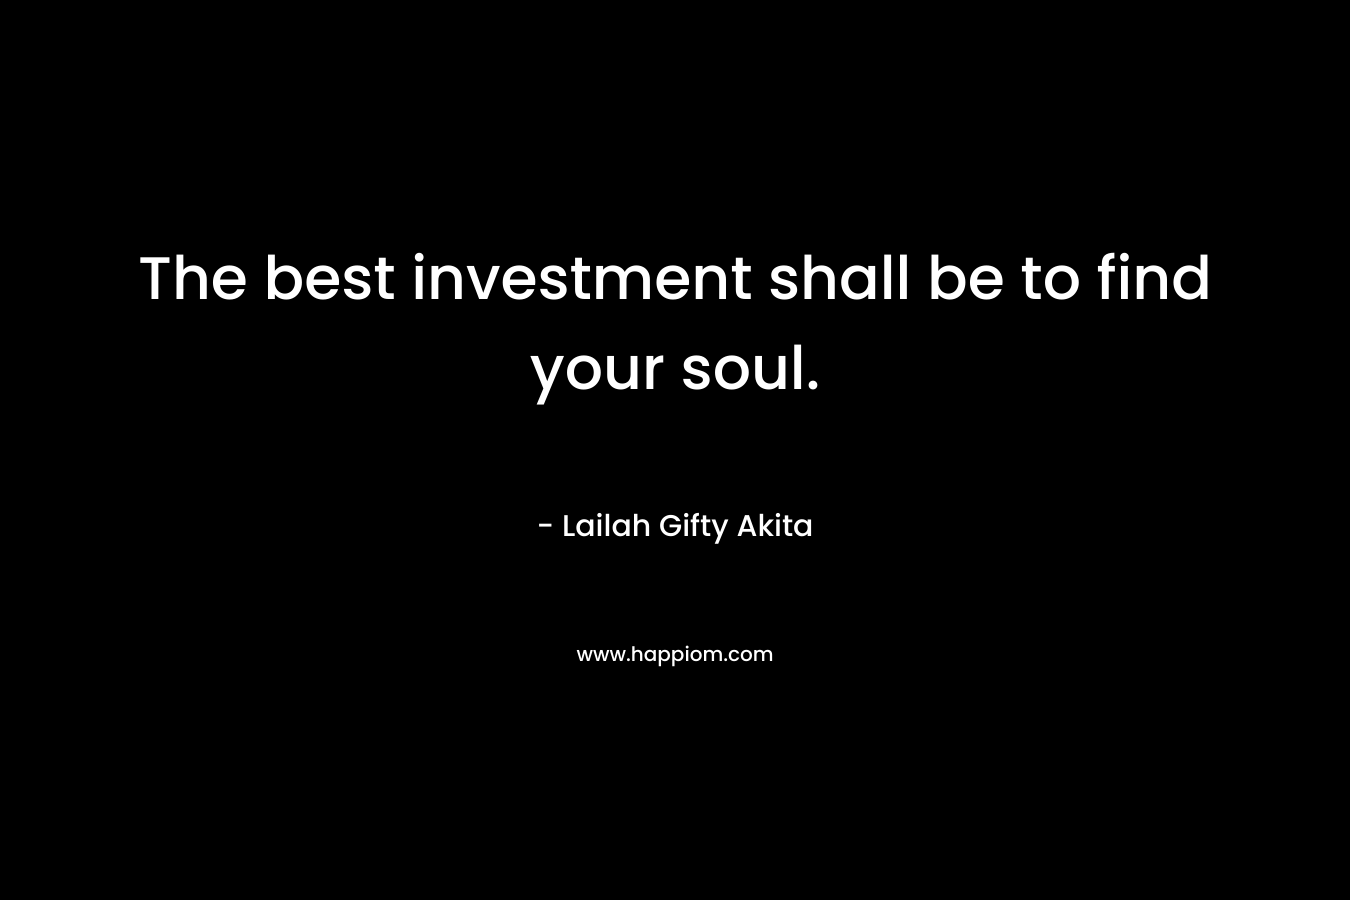 The best investment shall be to find your soul.